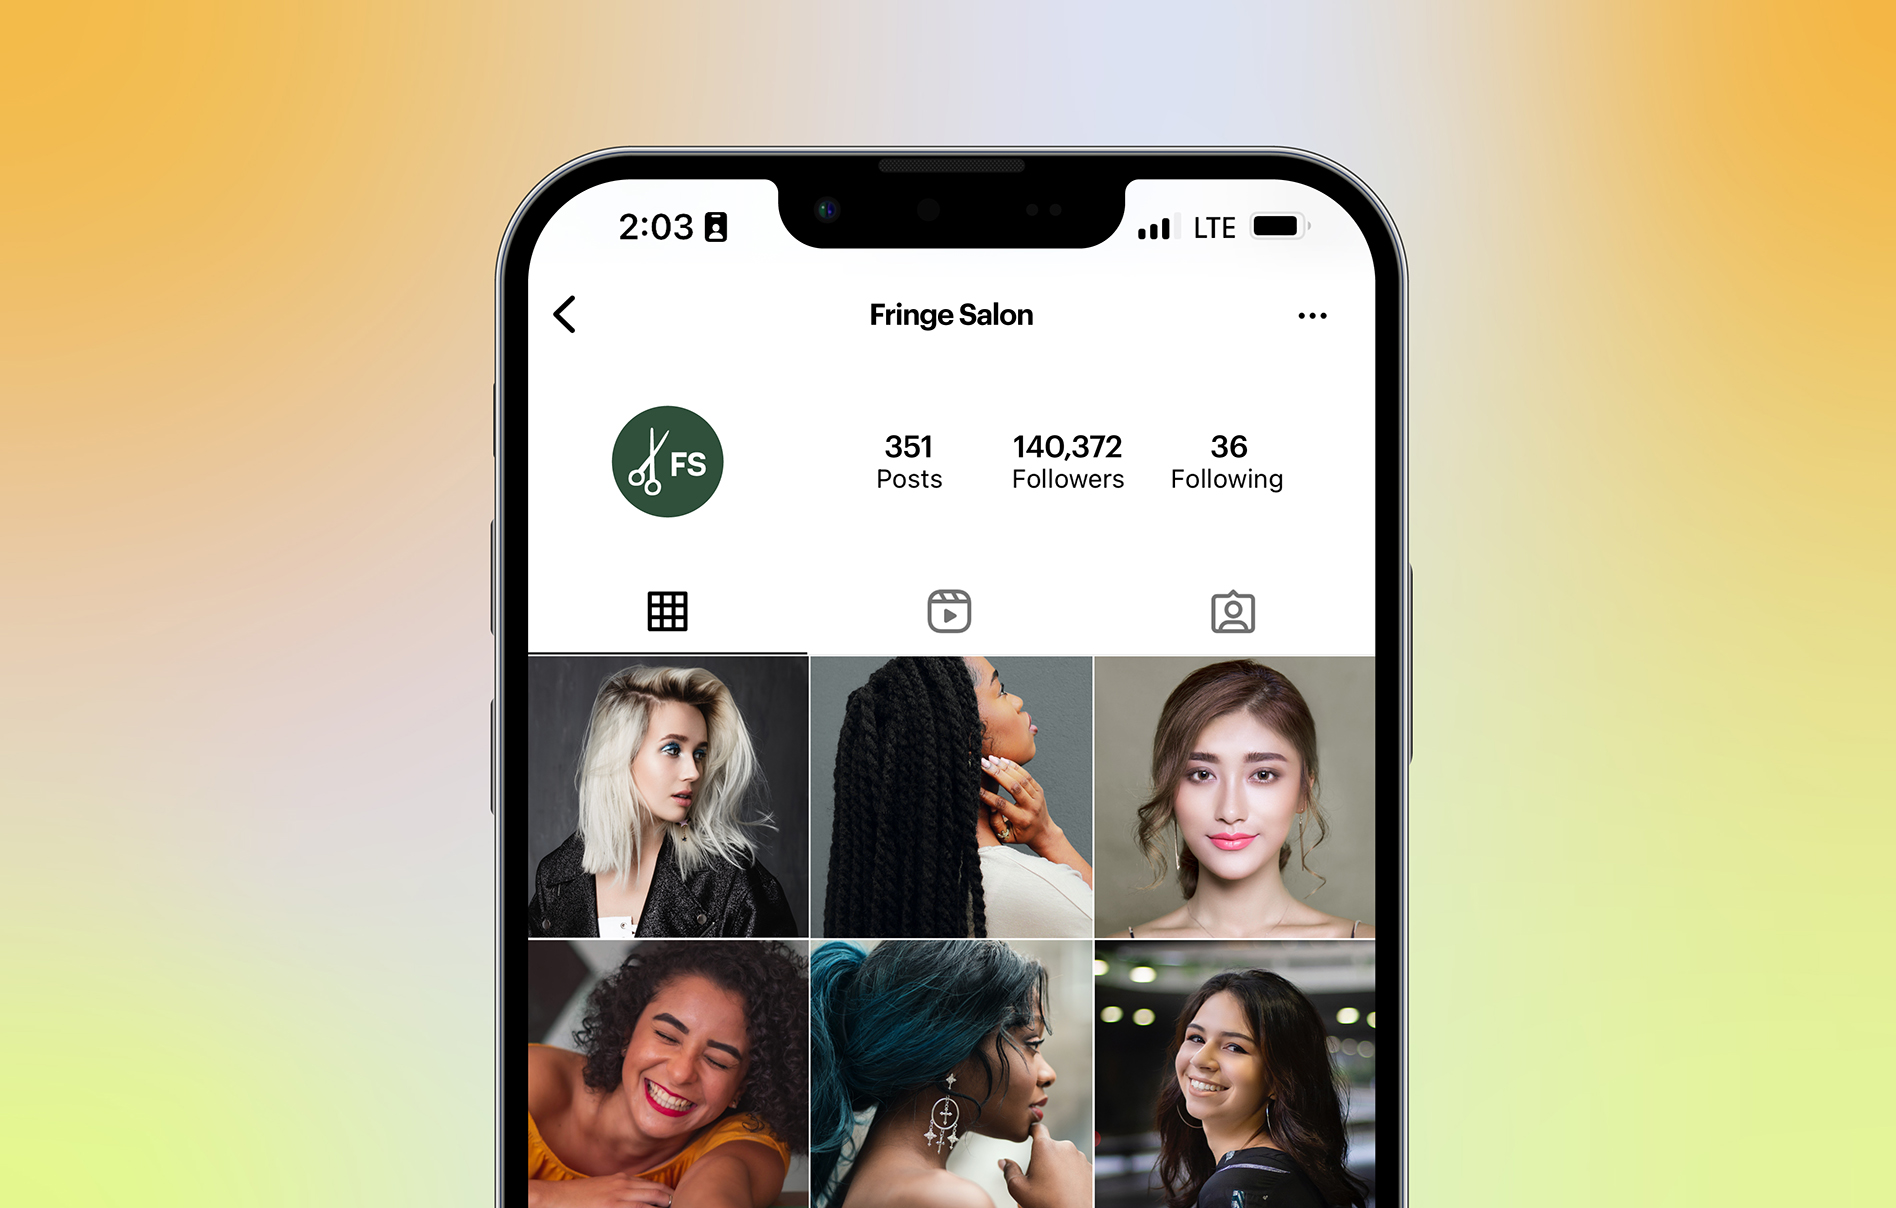 Phone showing a salon Instagram account profile